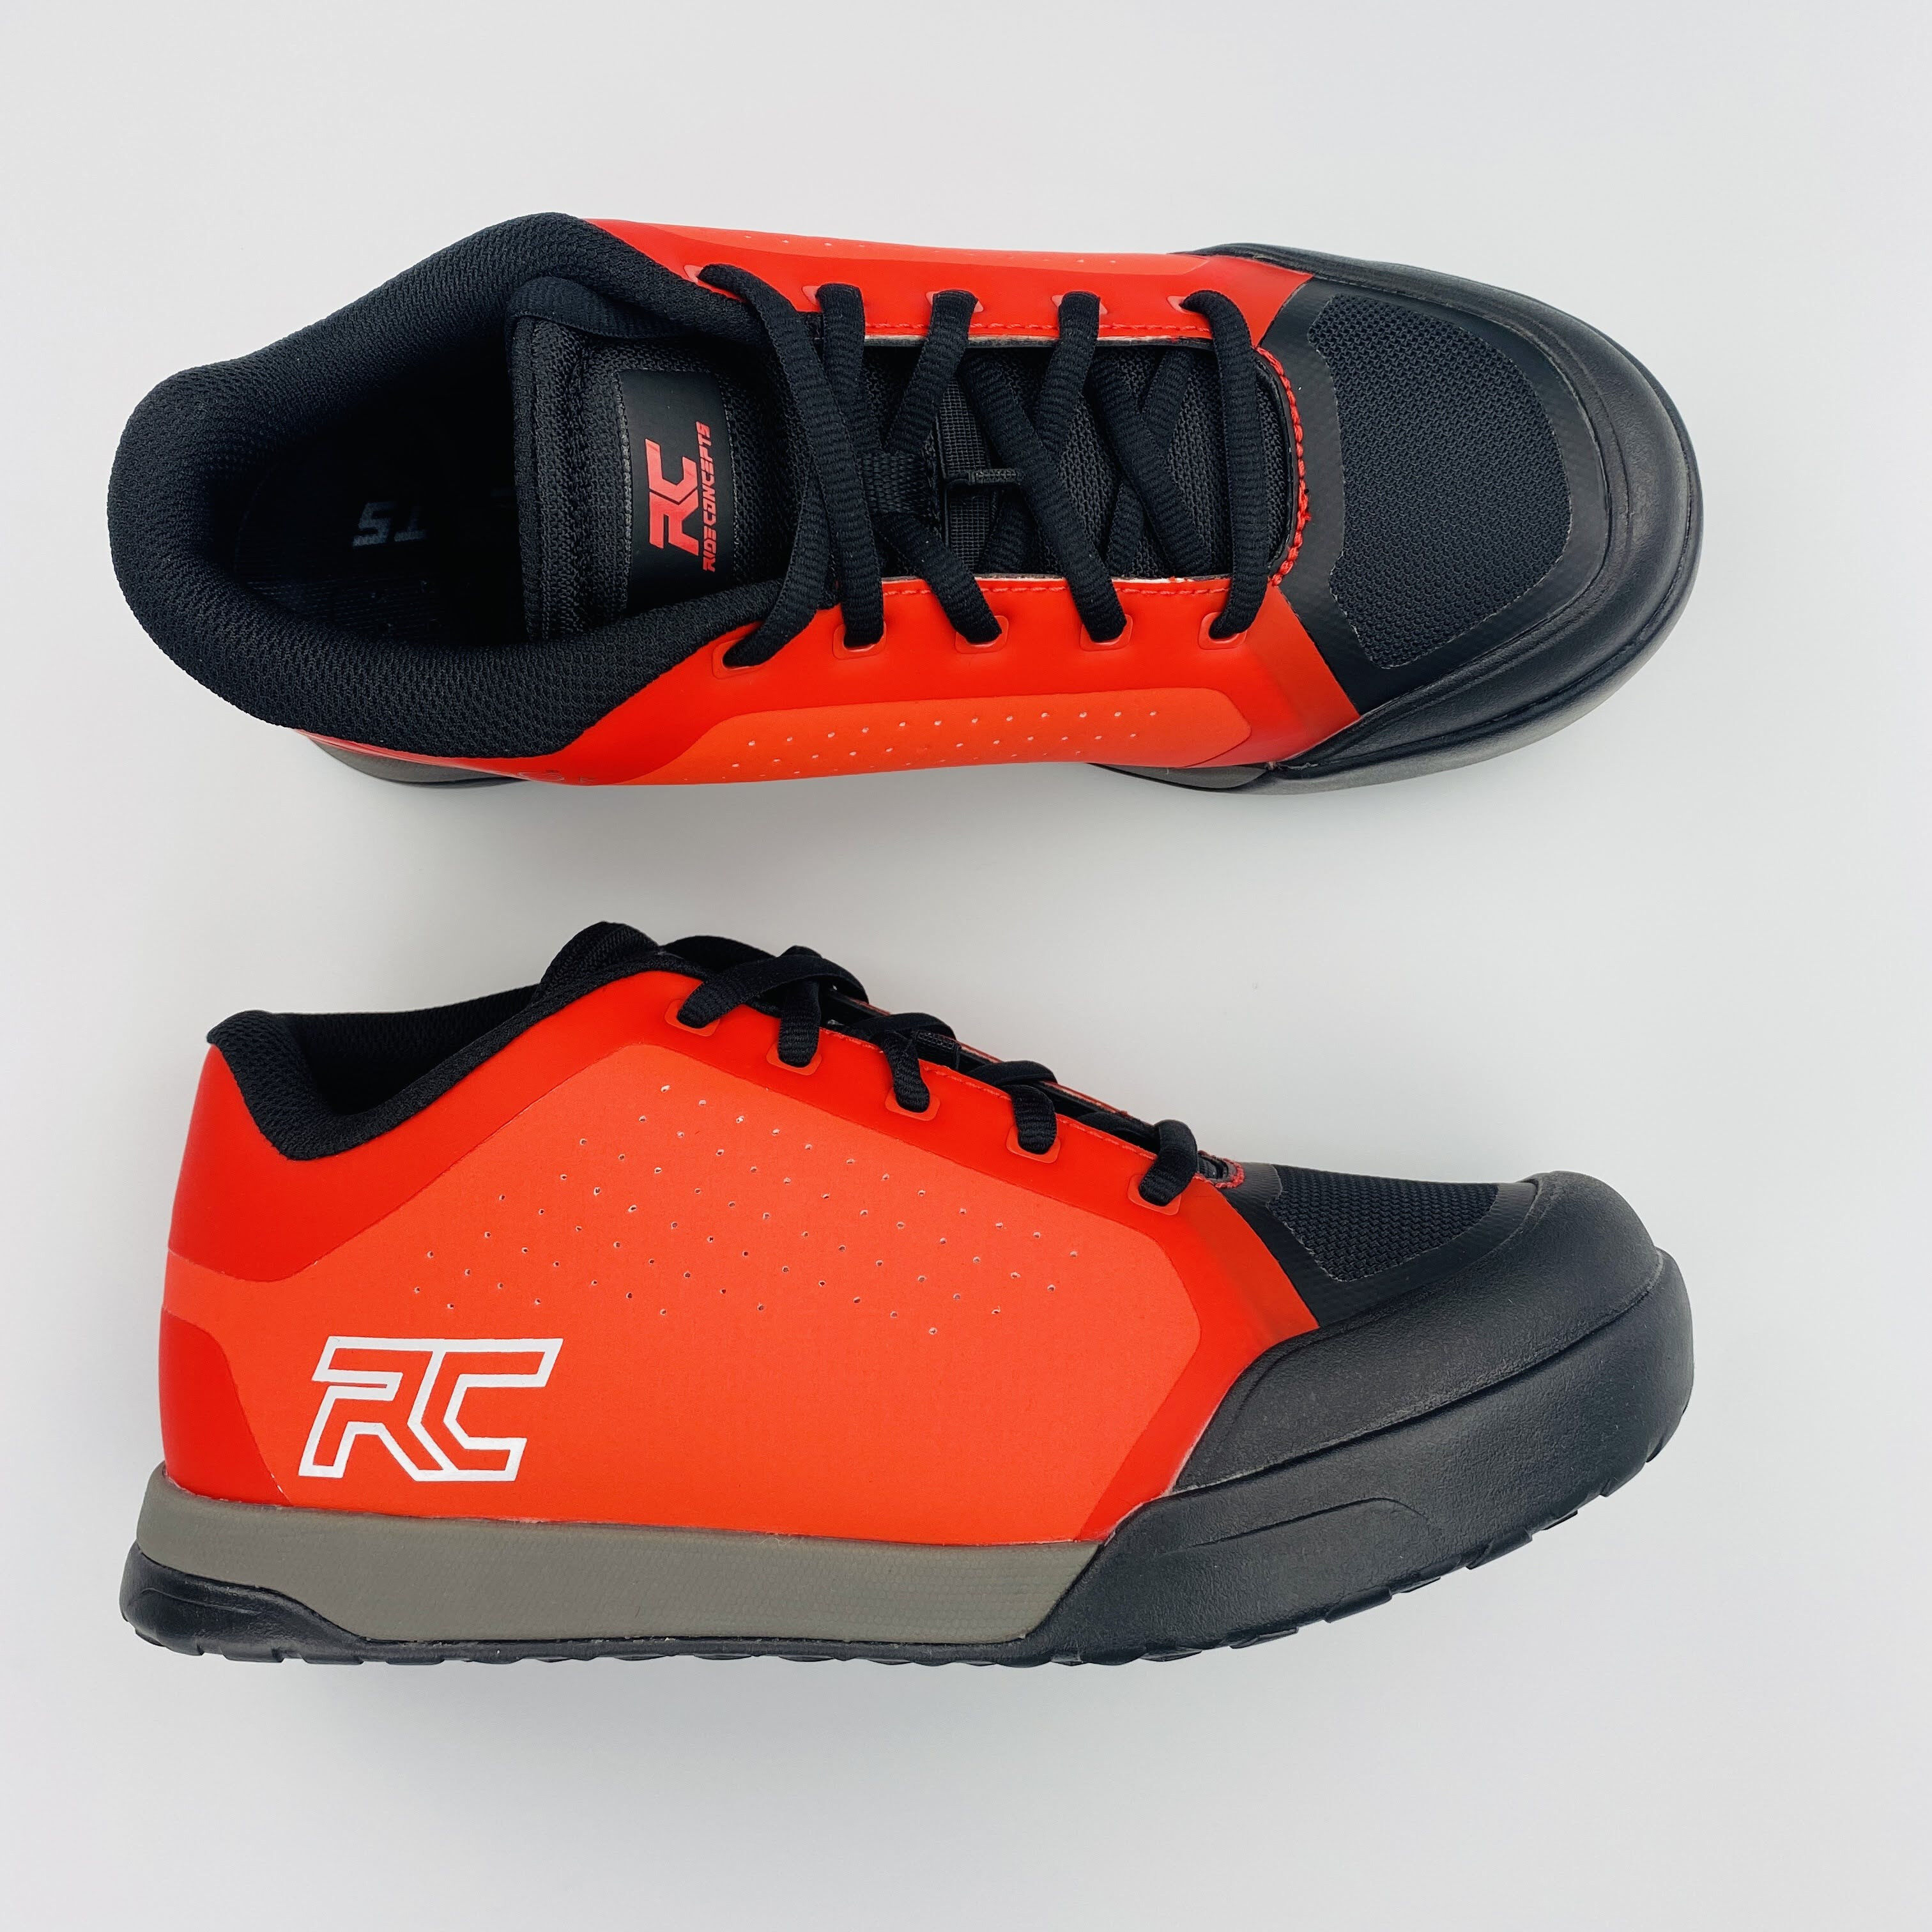 Ride Concepts Powerline - Seconde main Chaussures vélo homme - Rouge - 43 | Hardloop